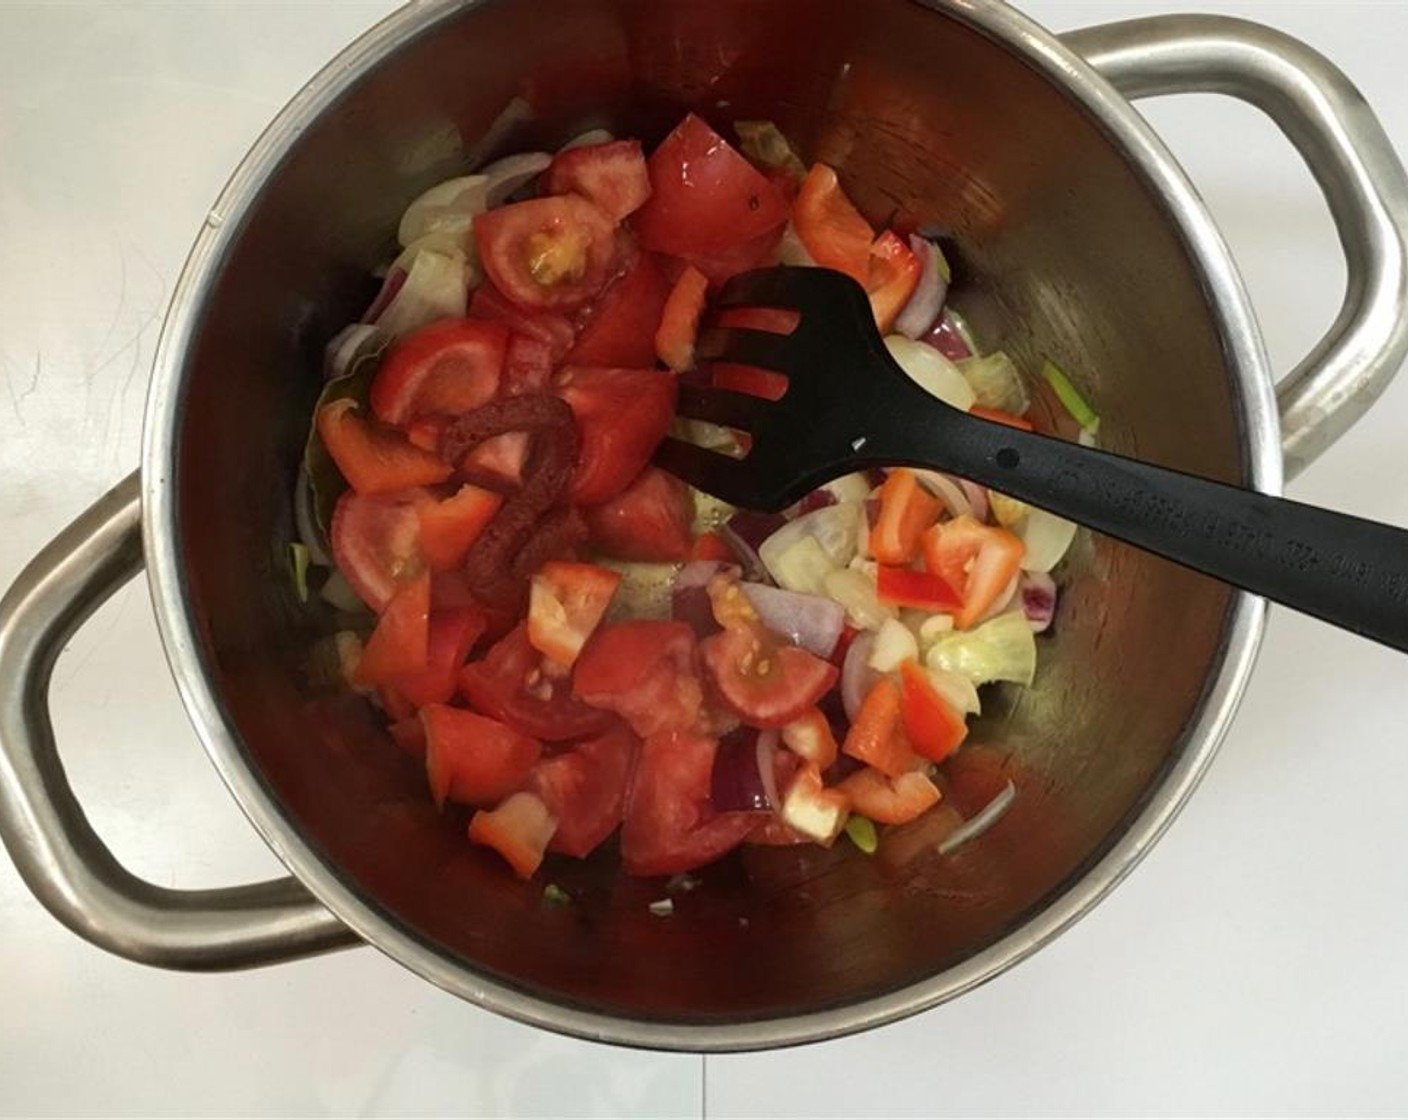 step 2 Place the pan over medium-high heat and stir well. Then roughly chop up the Tomatoes (2), Tomato Paste (1 Tbsp), and the Red Bell Pepper (1/2). Add it to the pan.